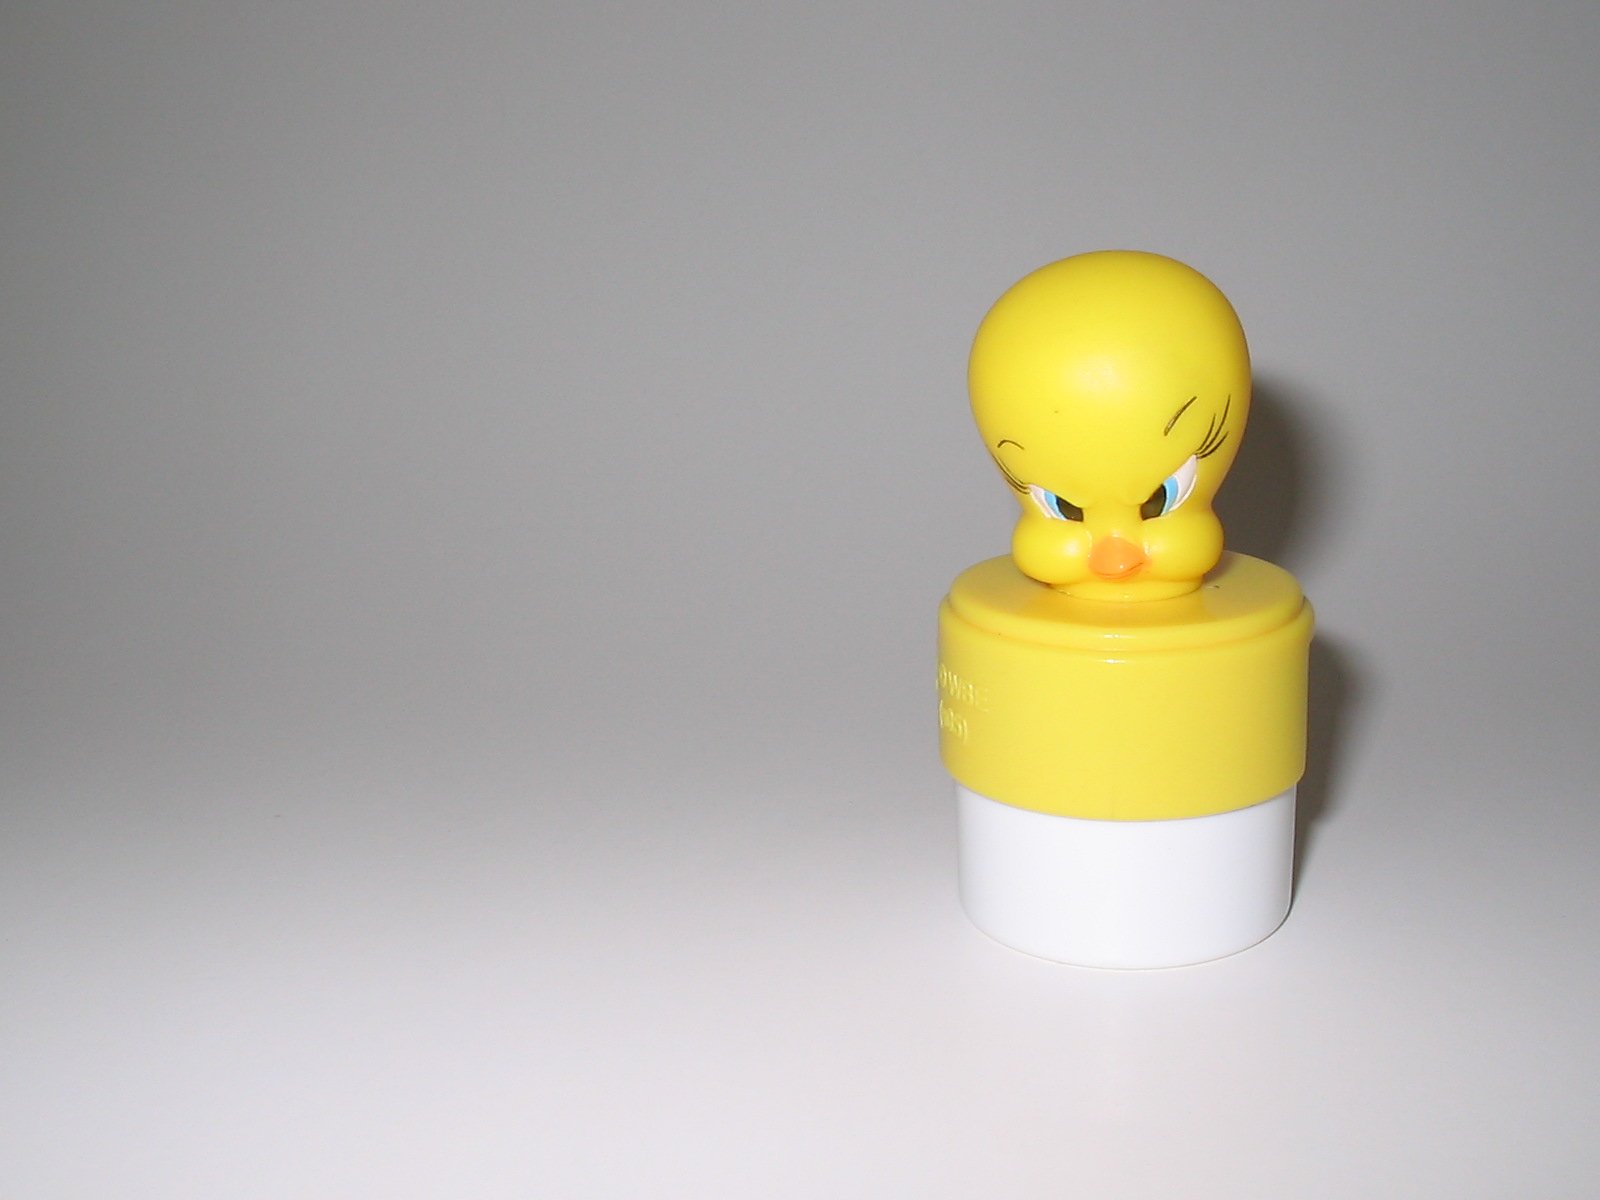 a rubber ducky yellow with big eyes on a white container